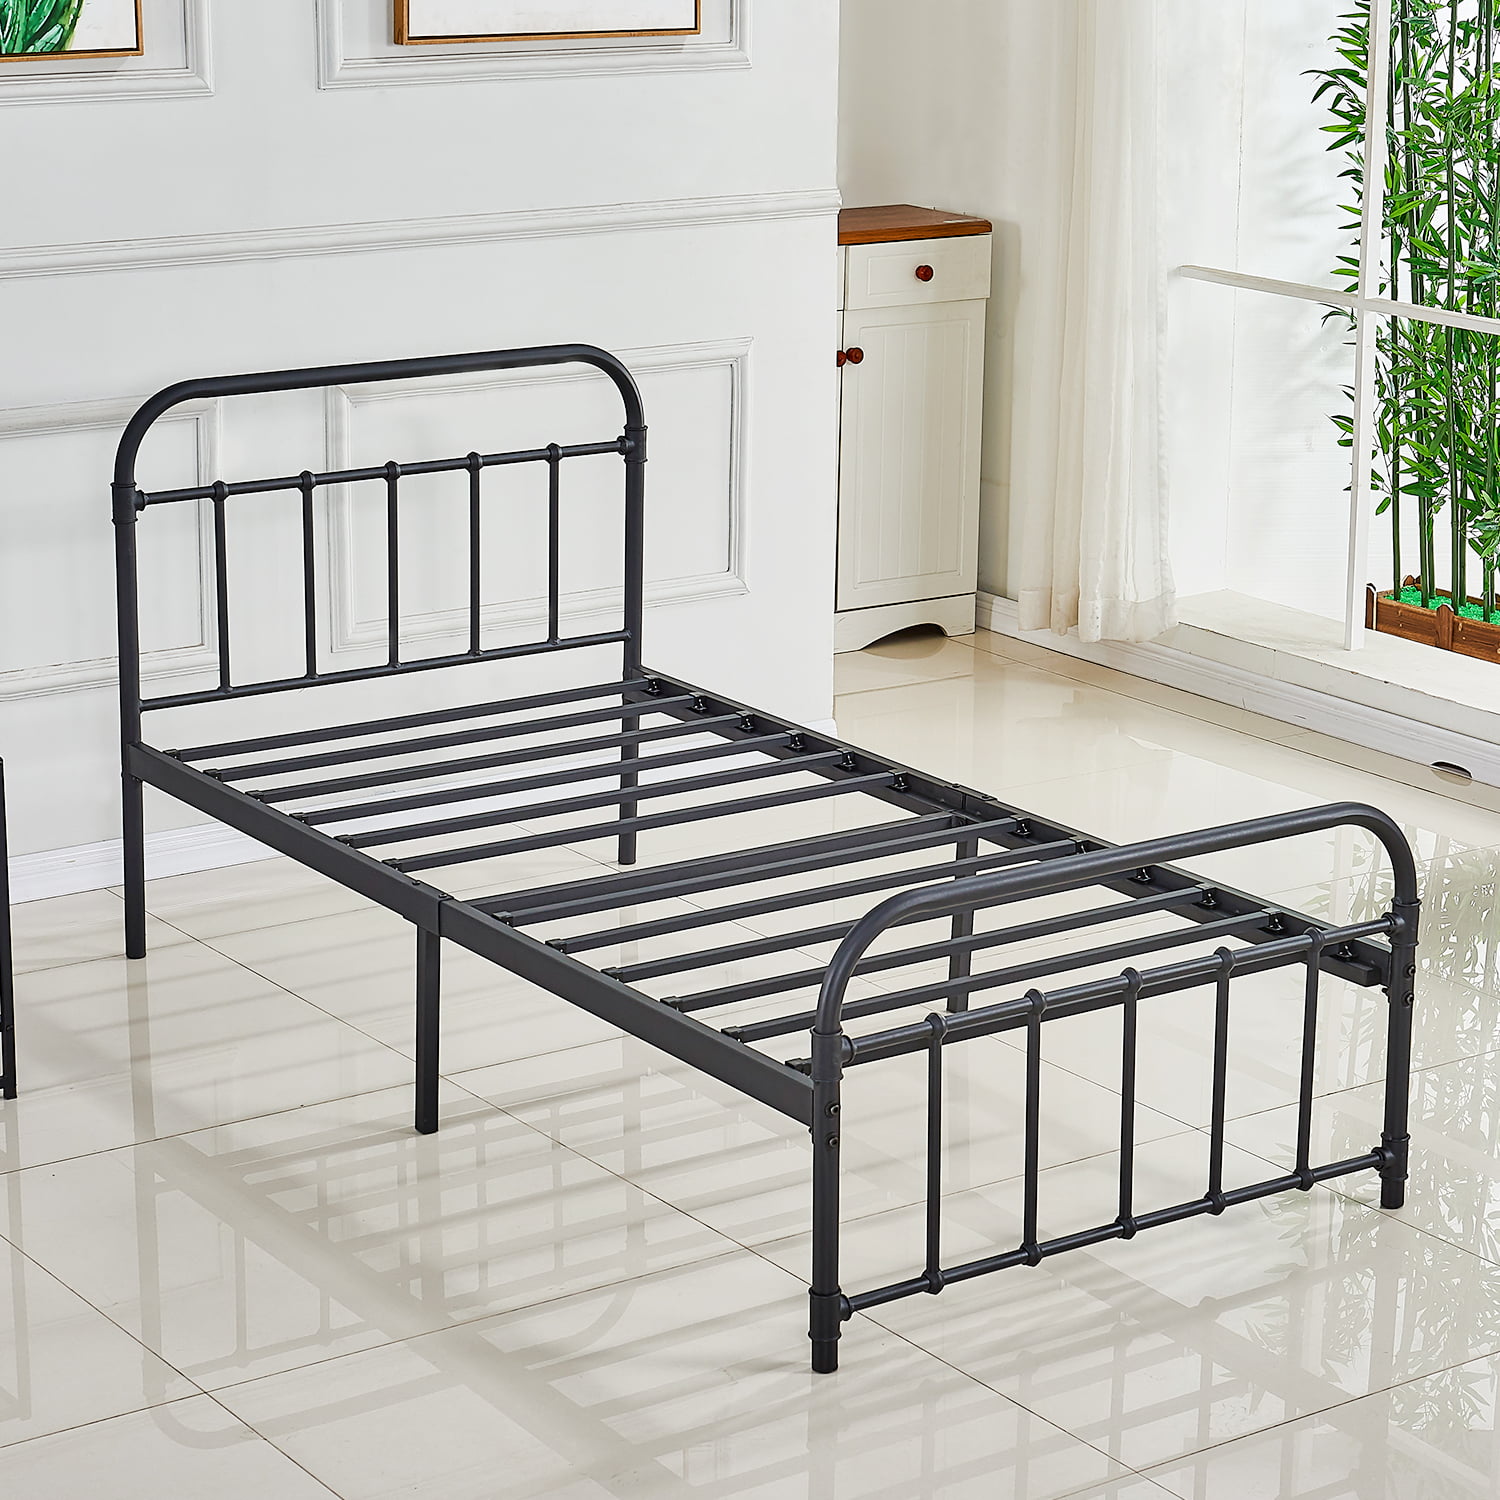 Dikapa Twin Size Bed Frame Base Metal, Twin Platform Metal Bed Frame With Headboard And Footboard Mattress Foundation